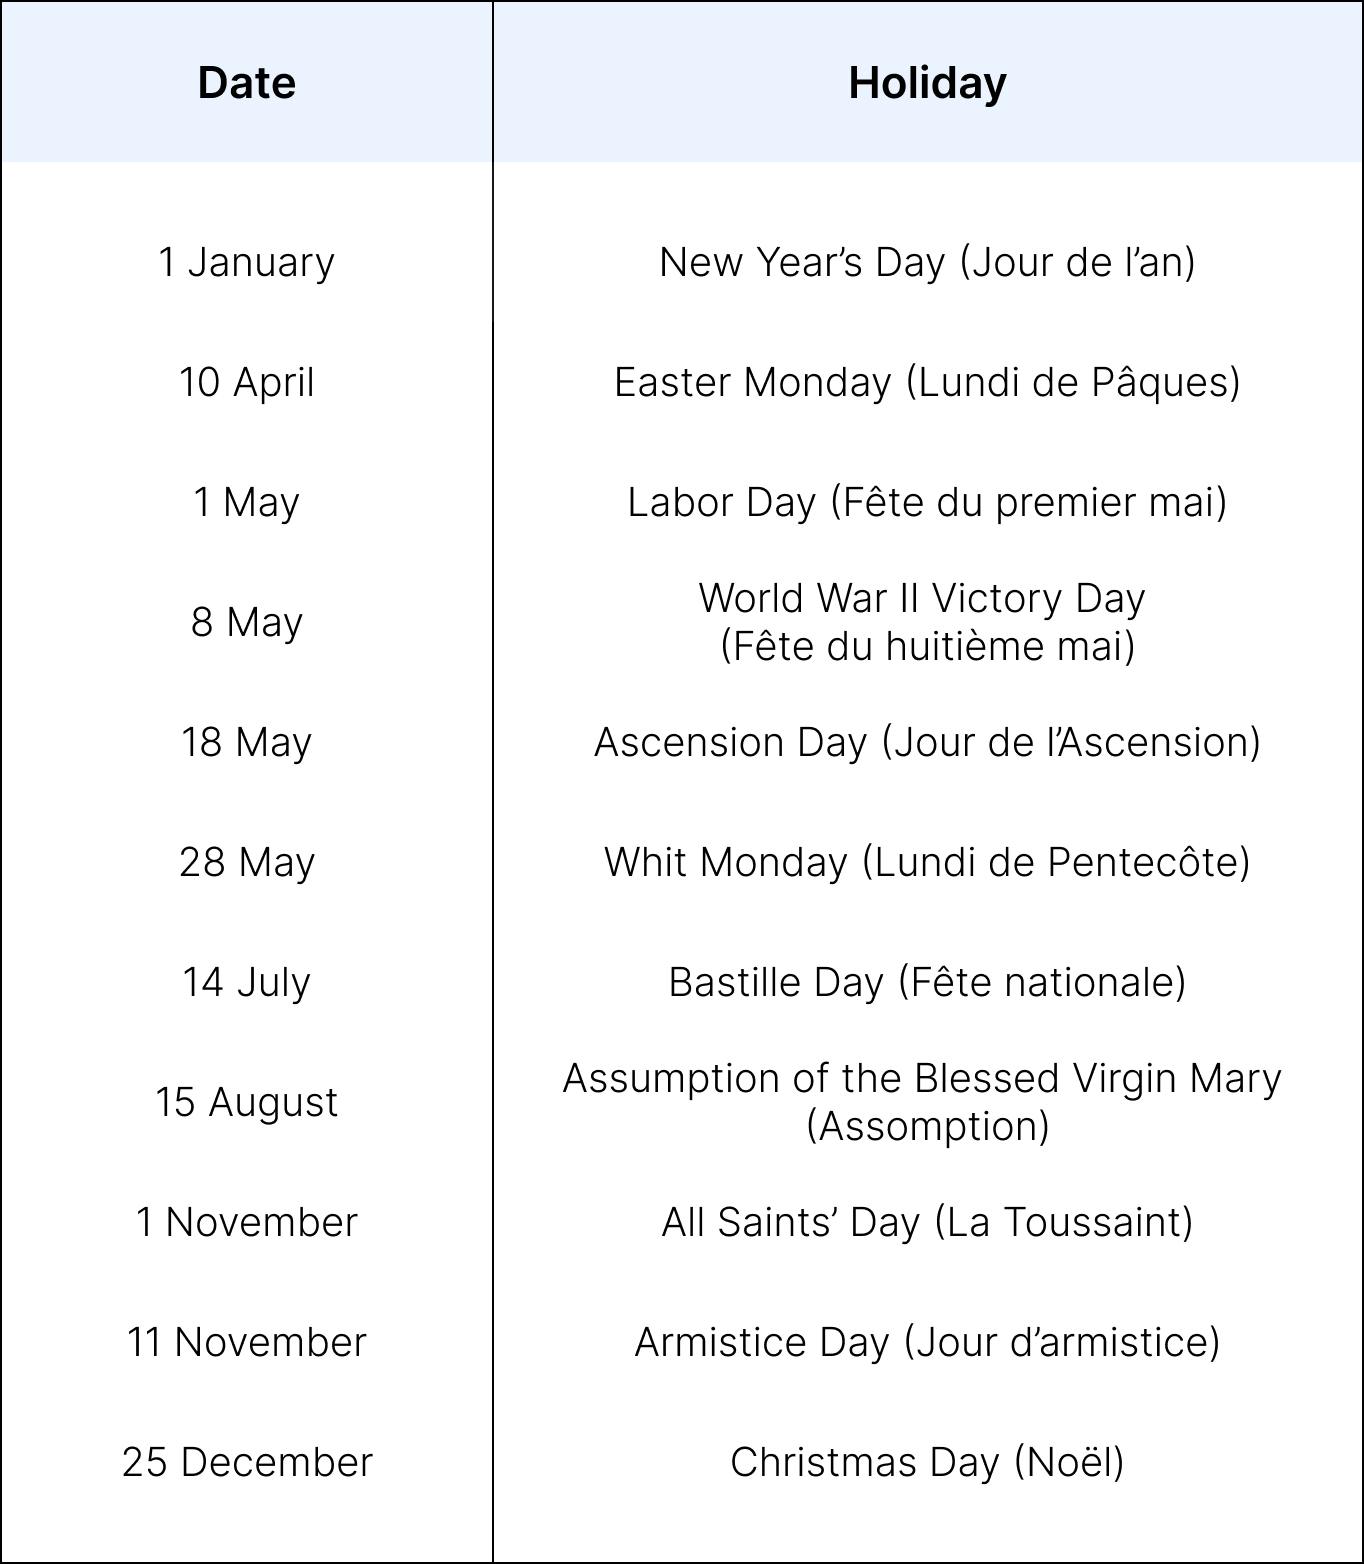 Table showing the public holidays in France.